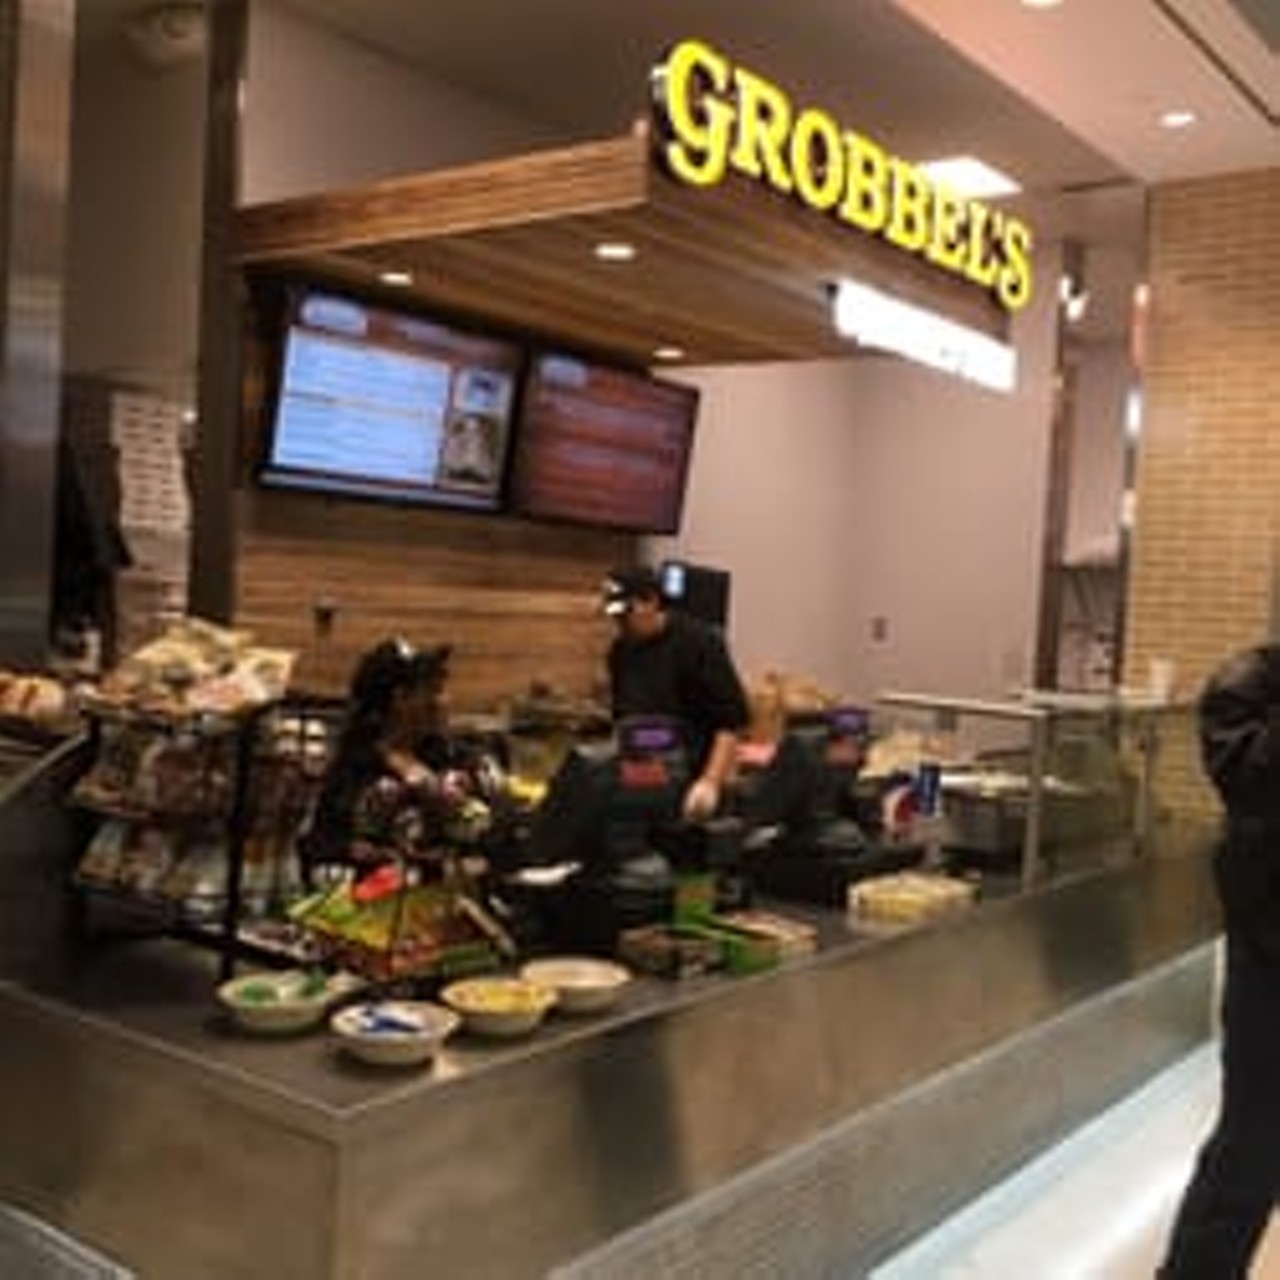 Grobbel&#146;s Gourmet Deli 
In the mood for some corned beef? Grobbel's has got you covered. [Gate A1]